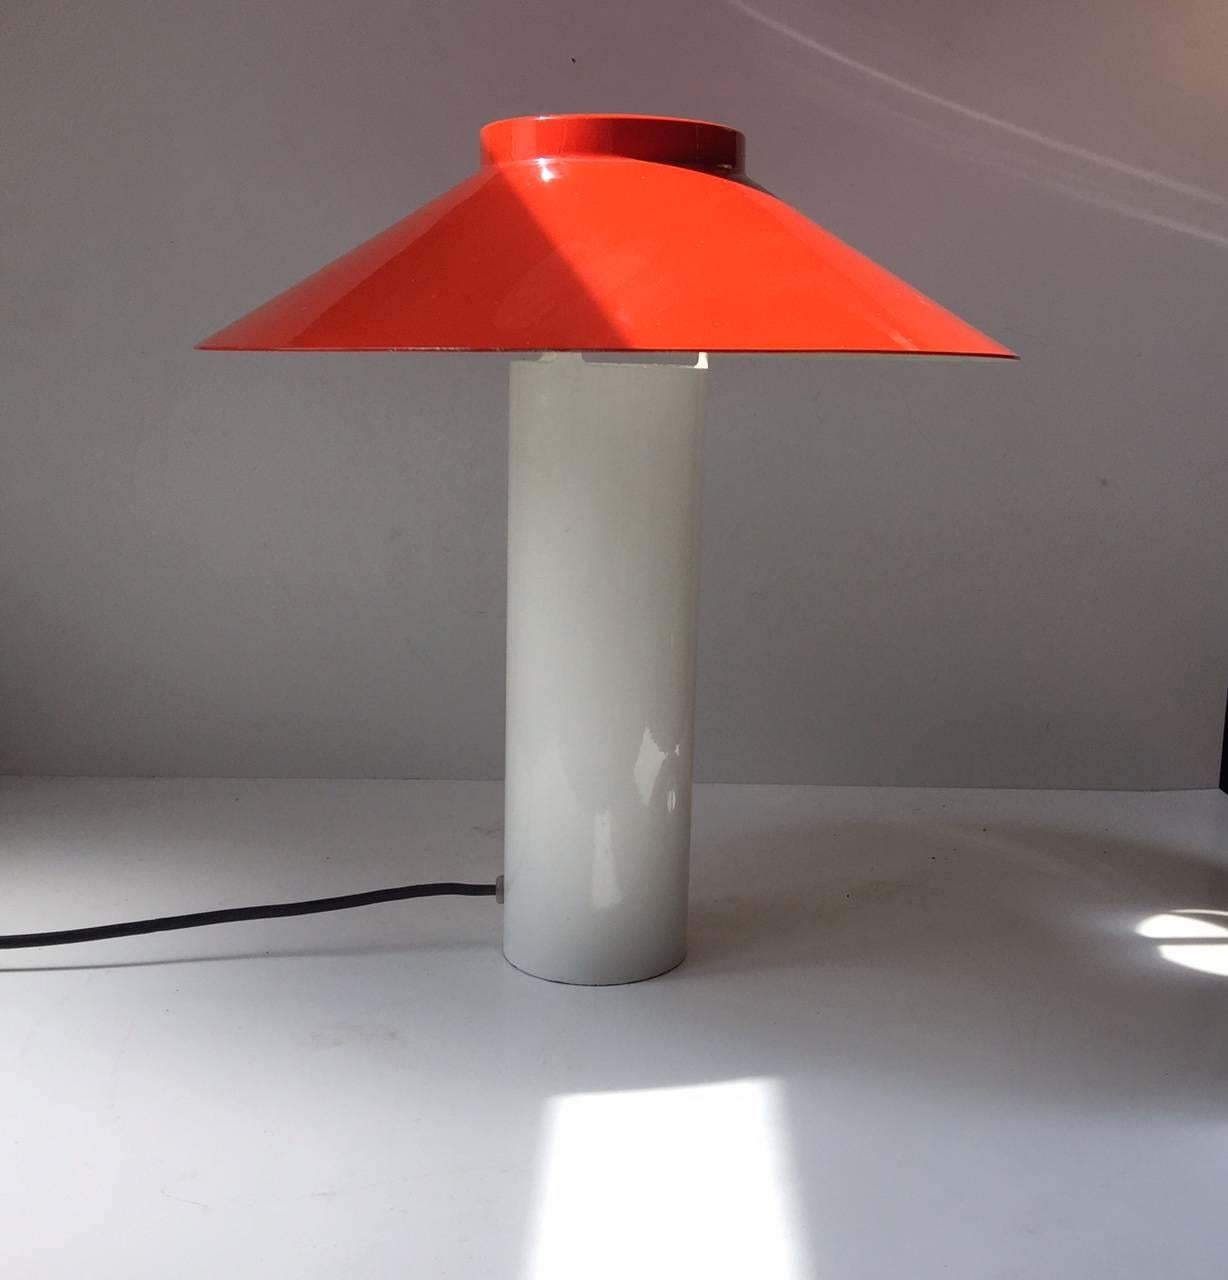 This rare modernistic and minimalistic metal table lamp was designed by Hans Schwazer in 1976. Its was manufactured by Holmegaard only in a few years.